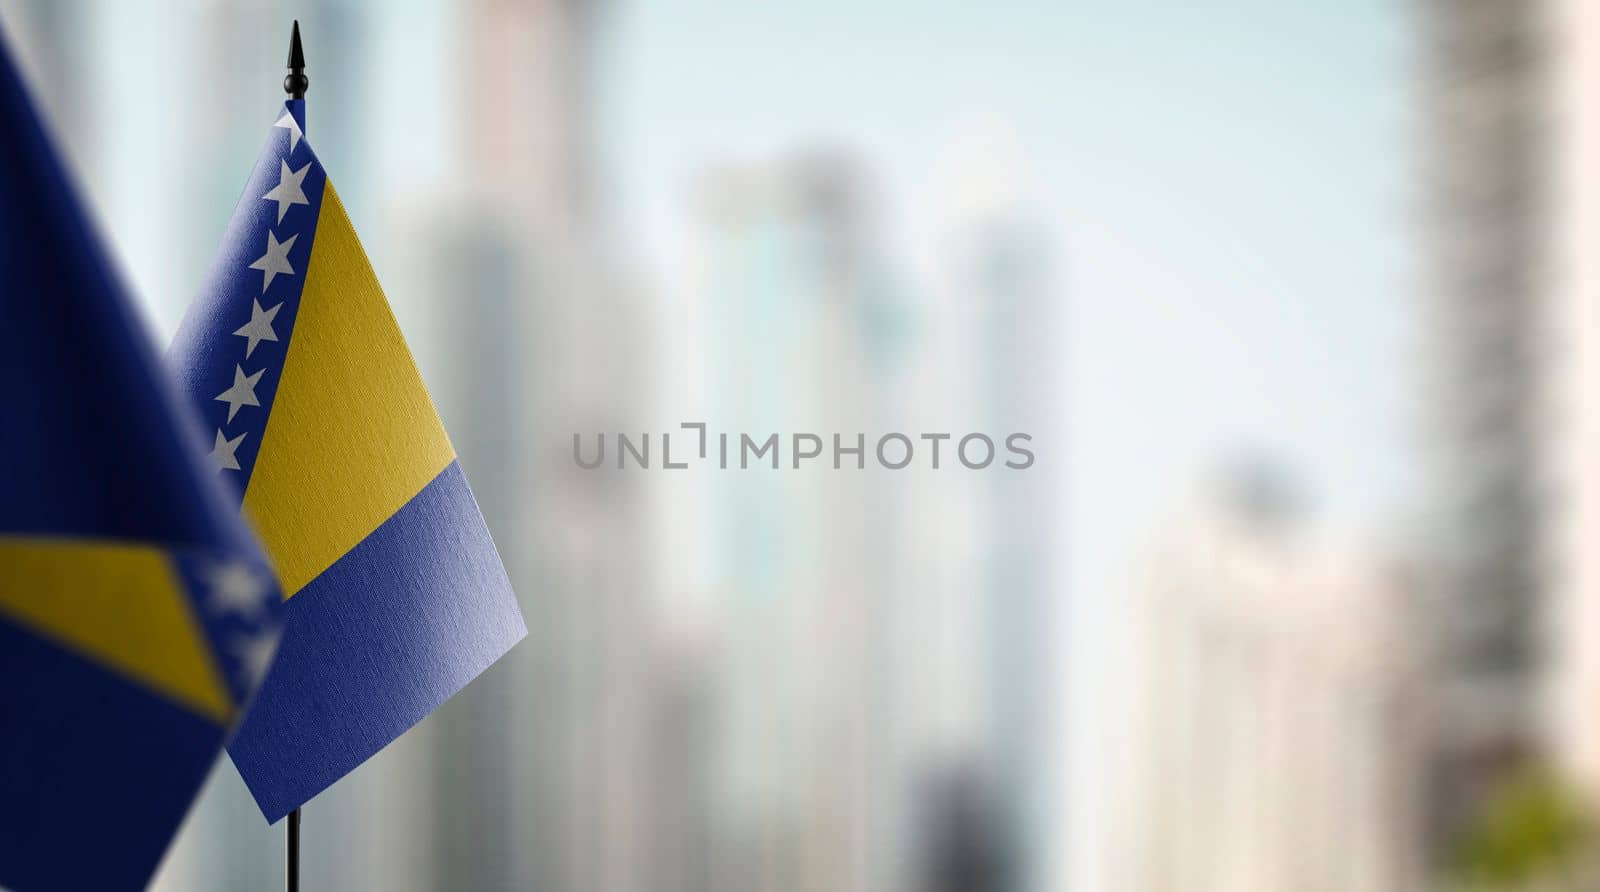 Small flags of the Bosnia and Herzegovina on an abstract blurry background.